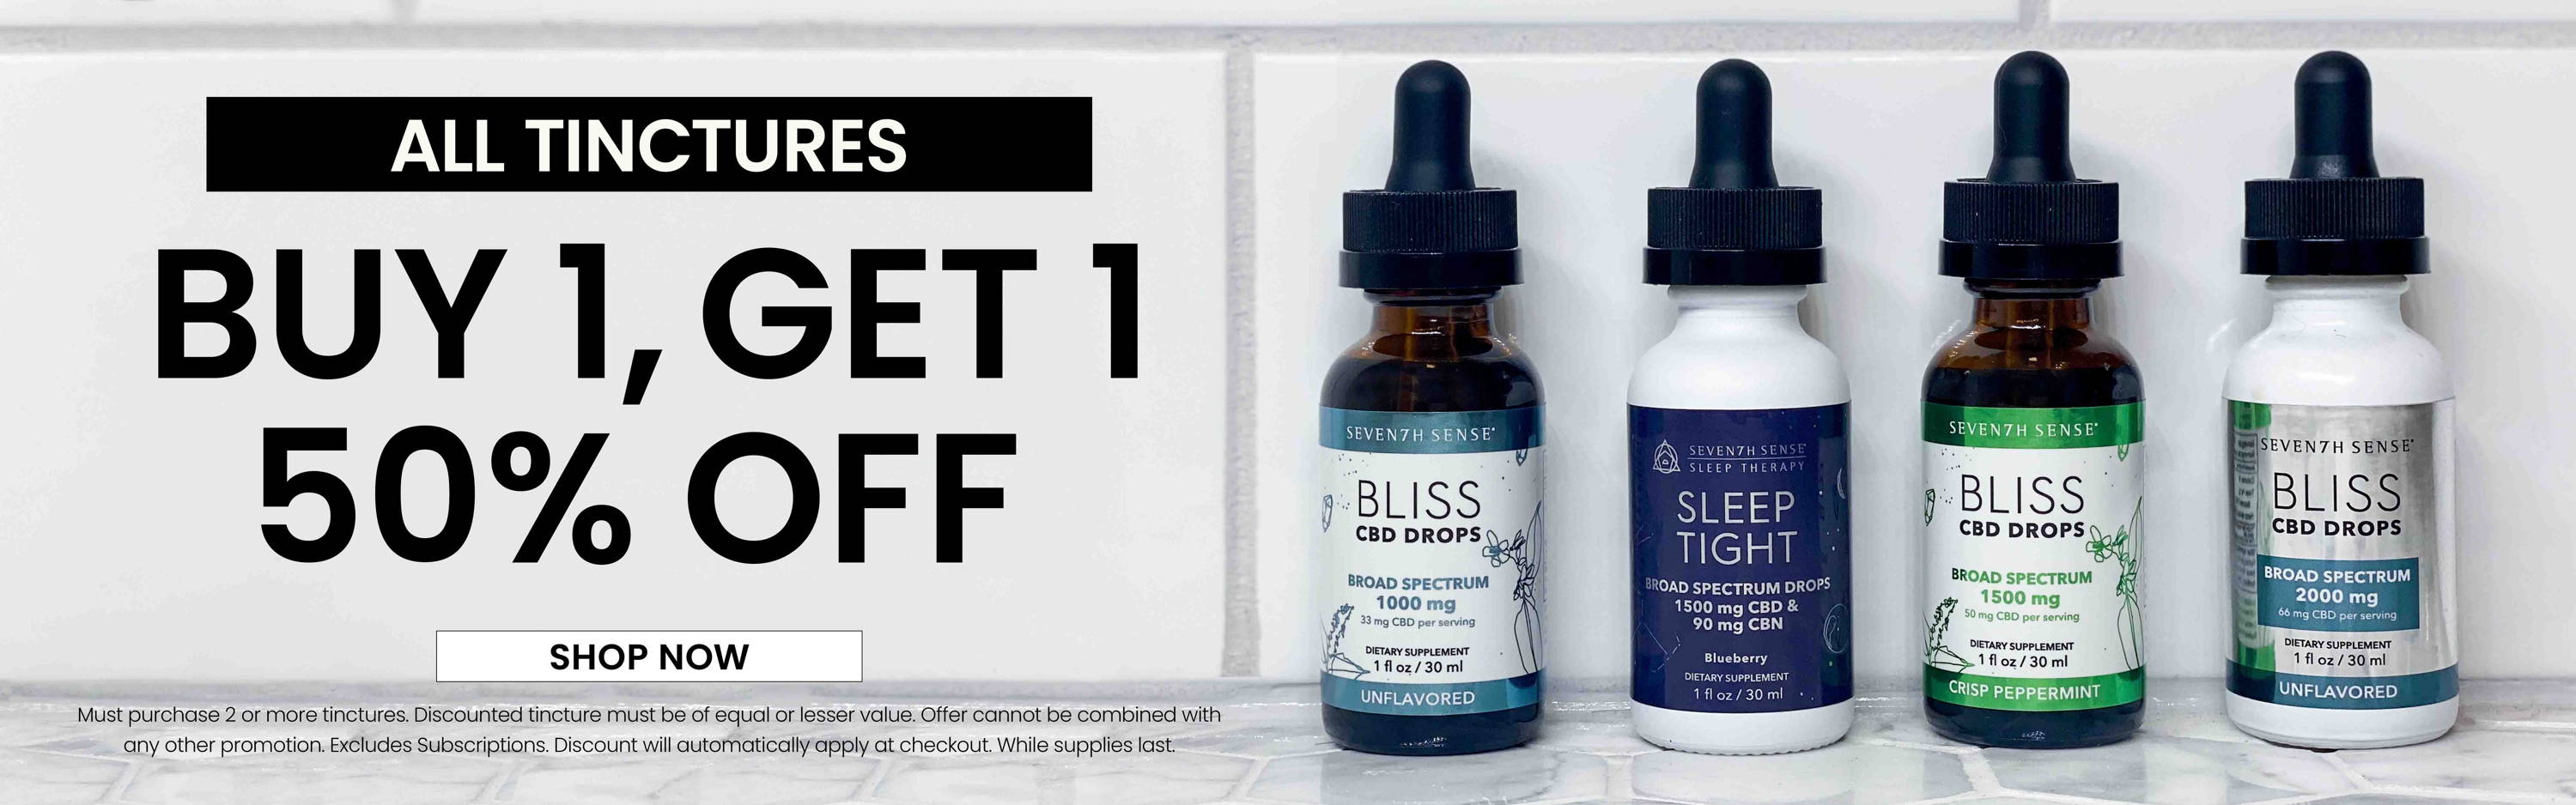 All Tinctures: Buy 1, Get 1 50% Off. Shop Now.